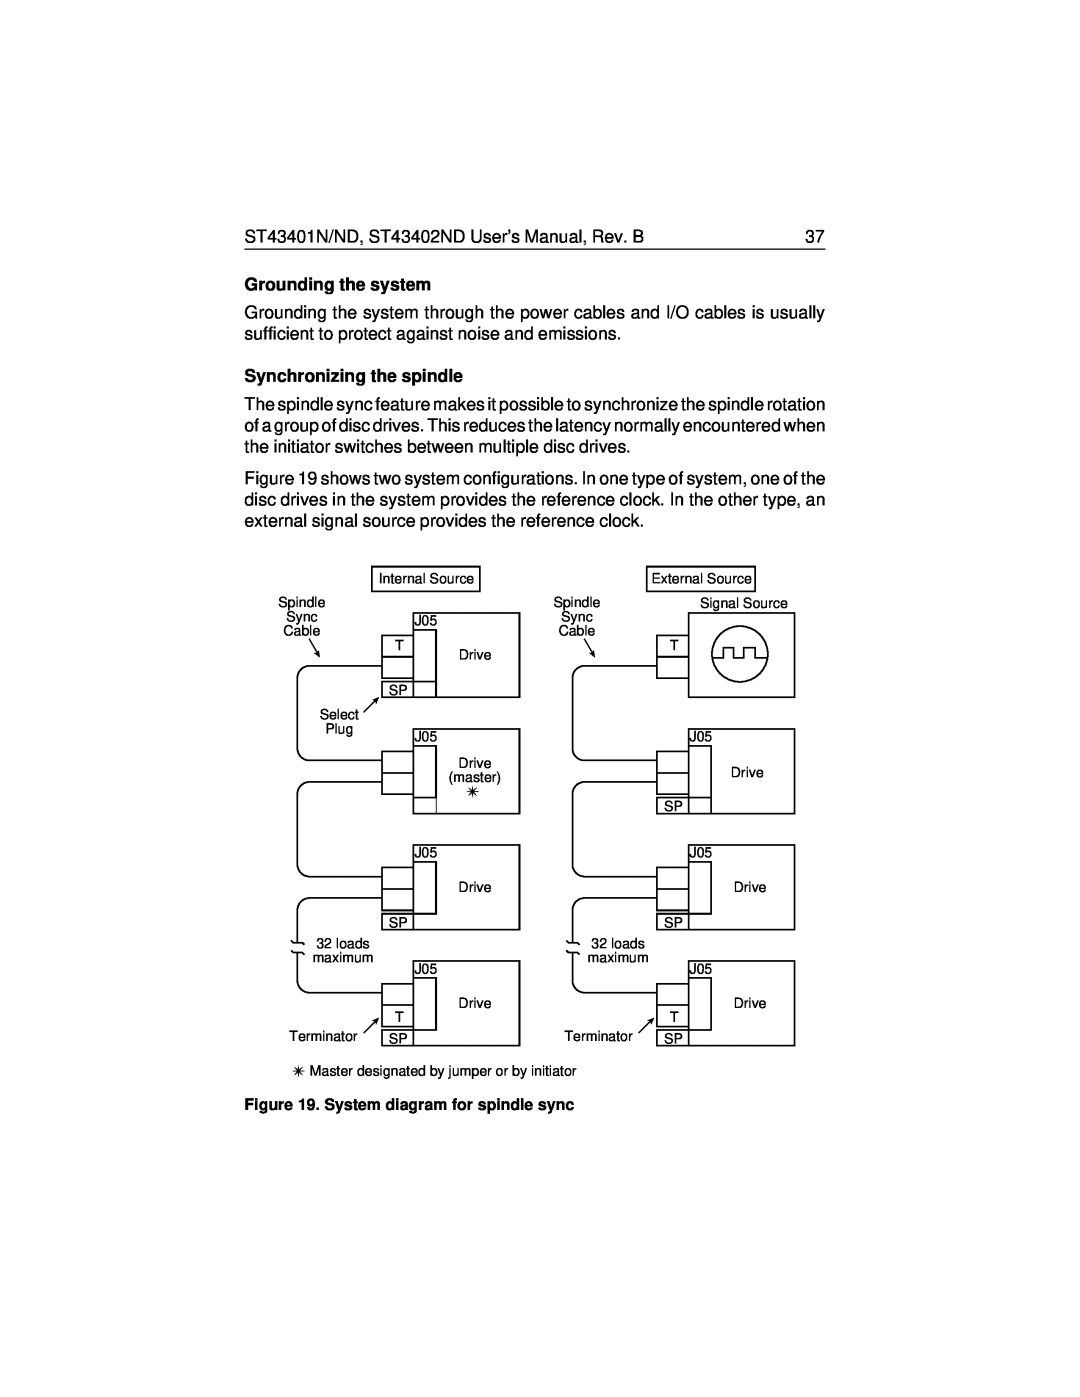 Seagate ST43401N/ND, ST43402ND user manual Grounding the system, Synchronizing the spindle, System diagram for spindle sync 